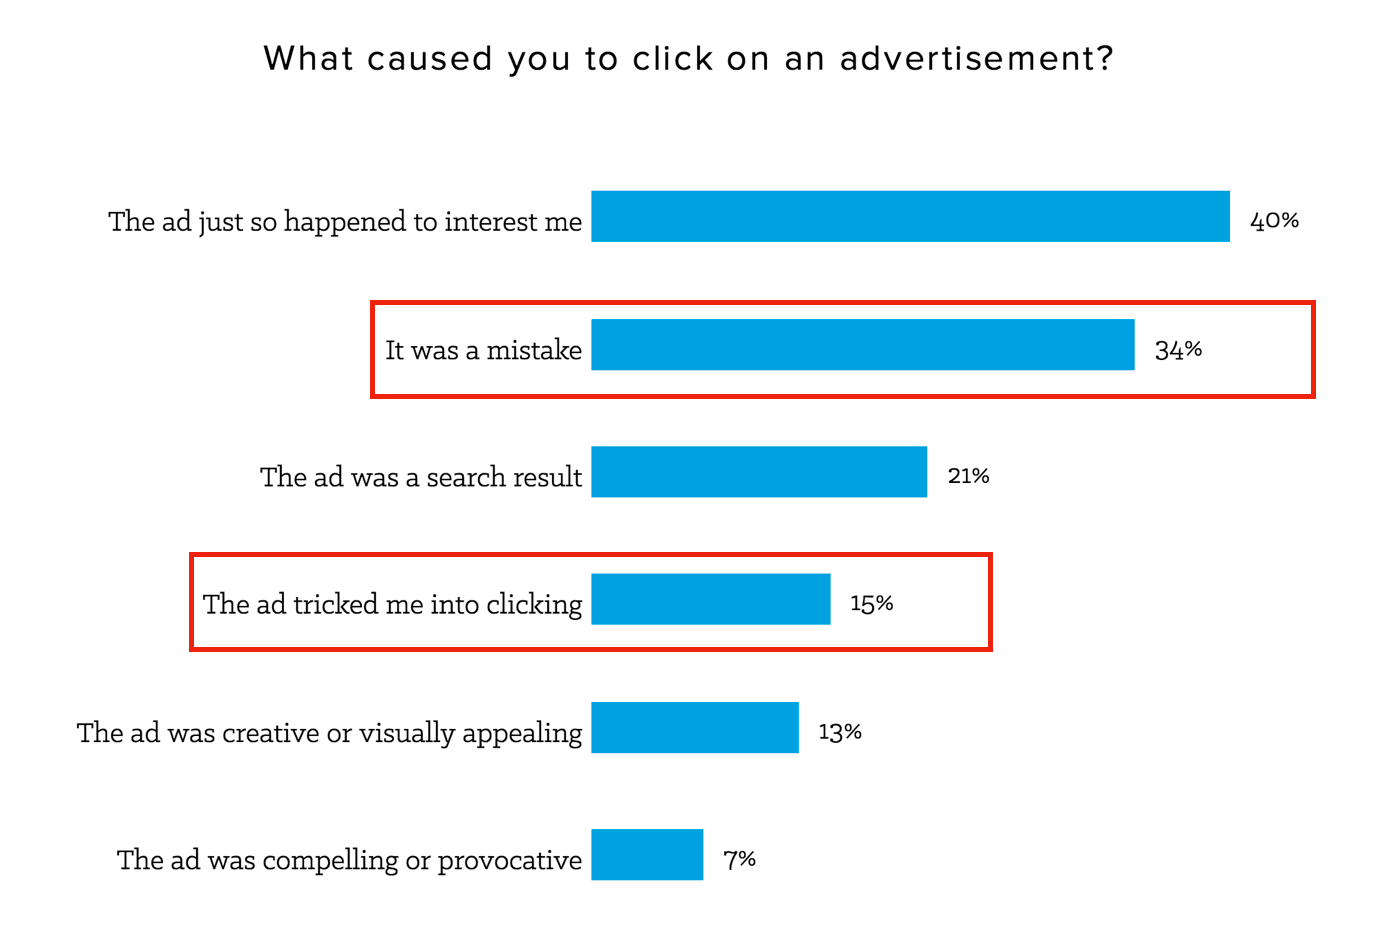 What caused customers to click on ads survey results